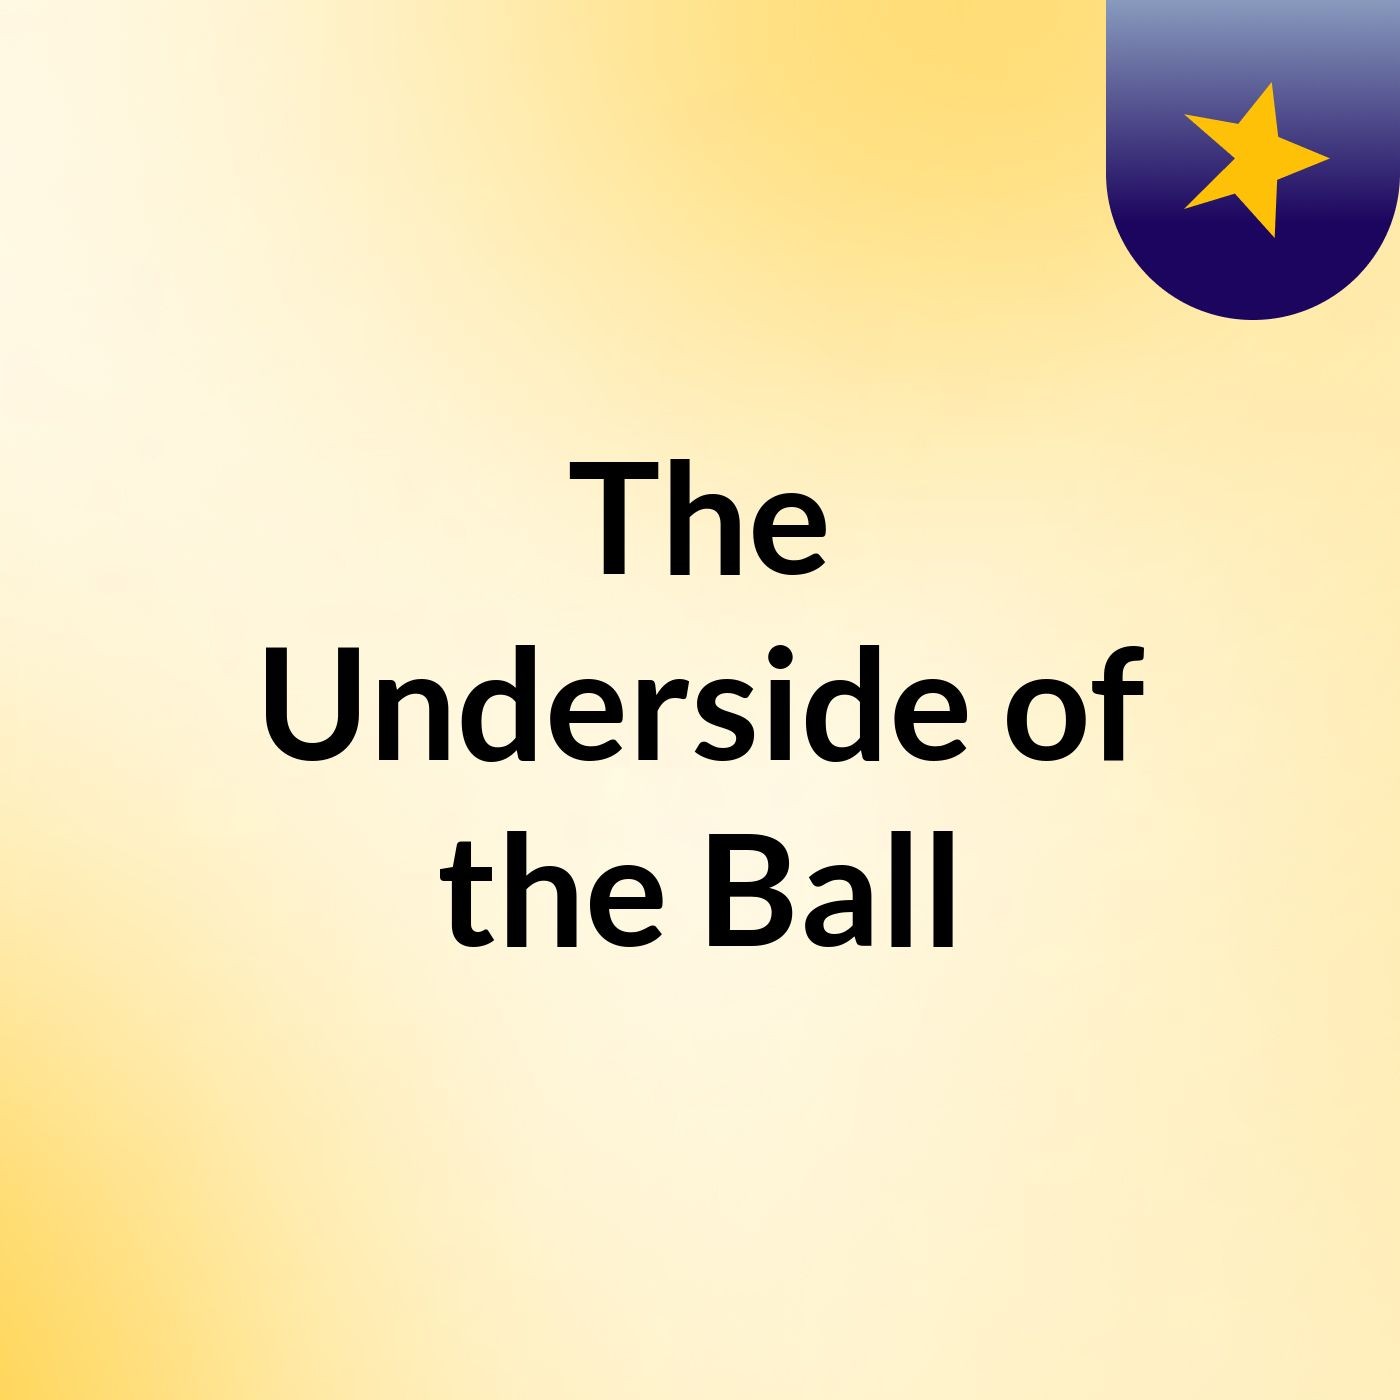 Episode 1- The Underside of the Ball